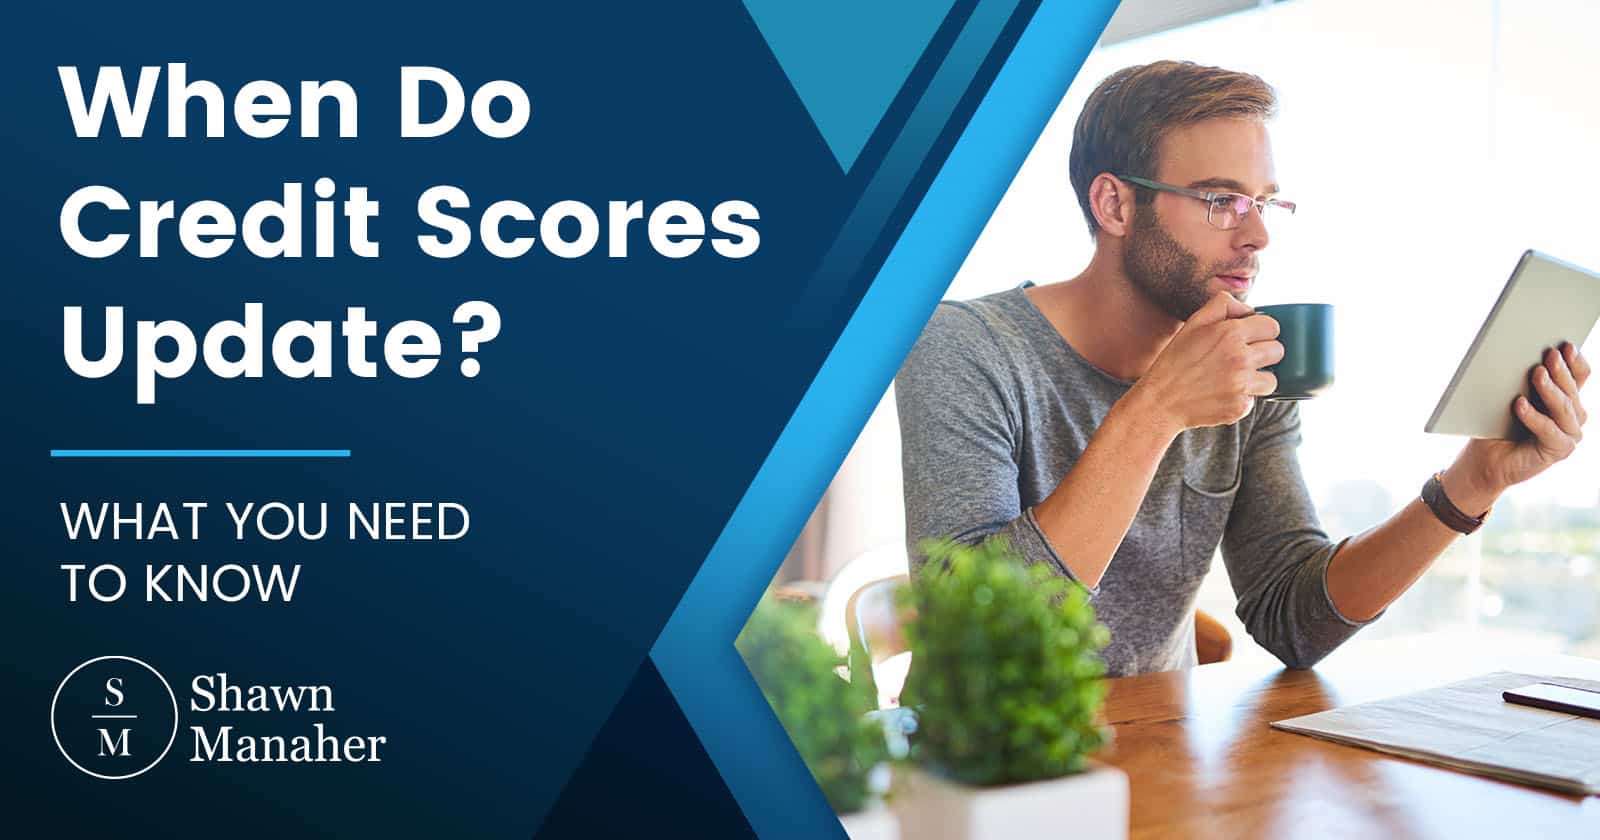 When Do Credit Scores Update? [WHAT YOU NEED TO KNOW]